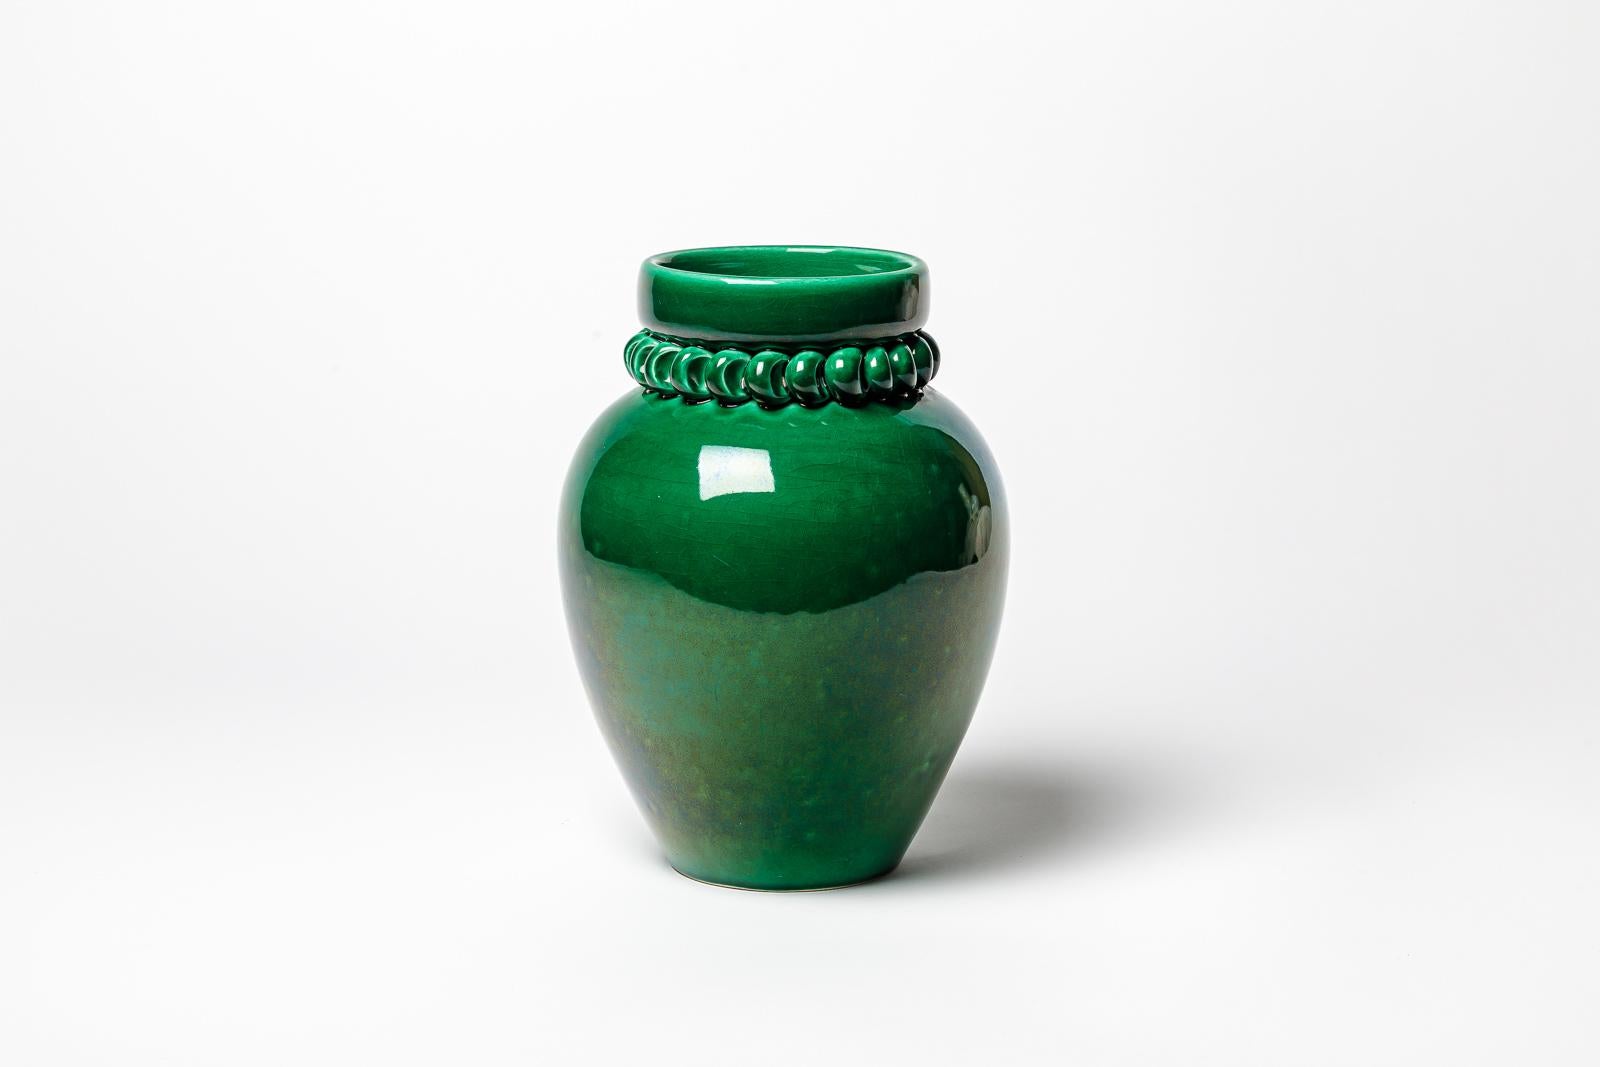 French Green glazed ceramic vase by Pol Chambost, circa 1930-1940. For Sale